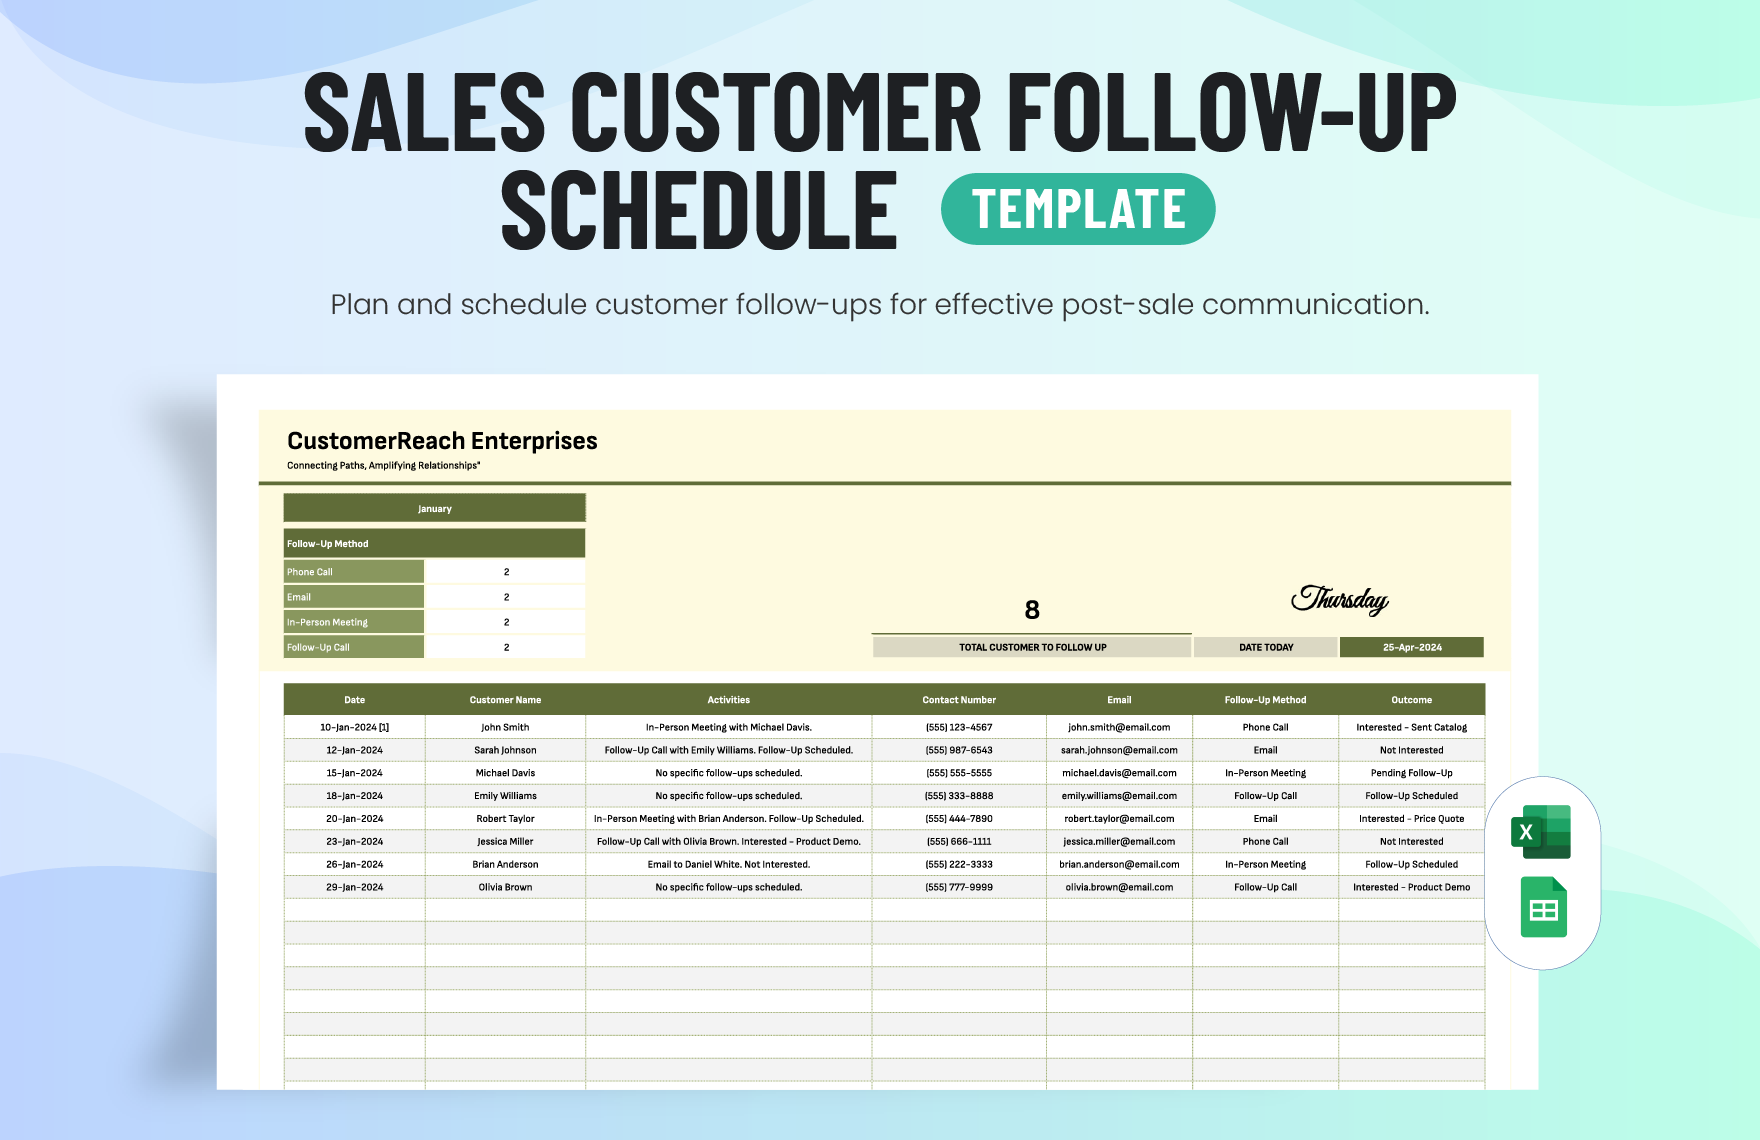 Sales Customer Follow-Up Schedule Template in Excel, Google Sheets